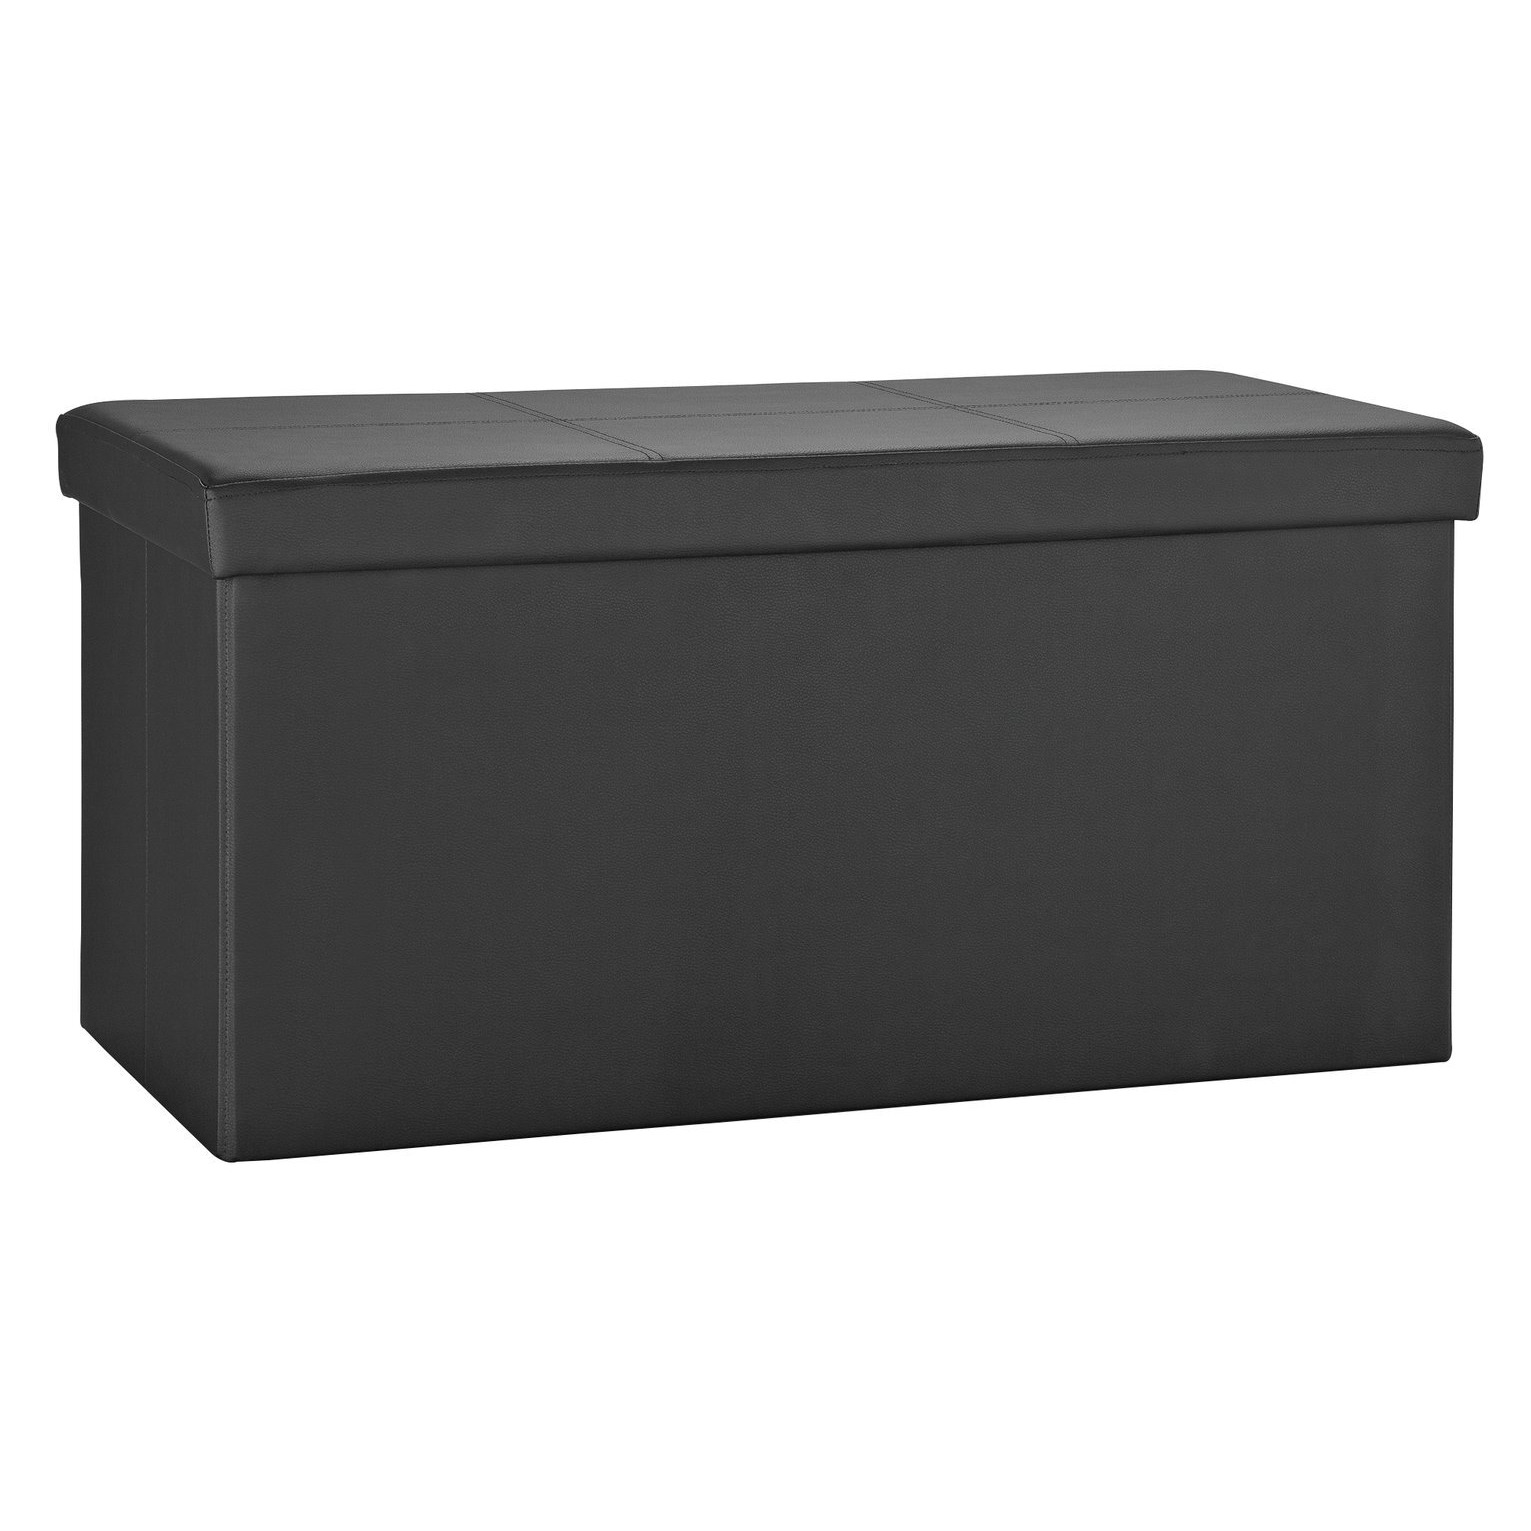 Argos Home Large Faux Leather Stitched Ottoman - Black - image 1